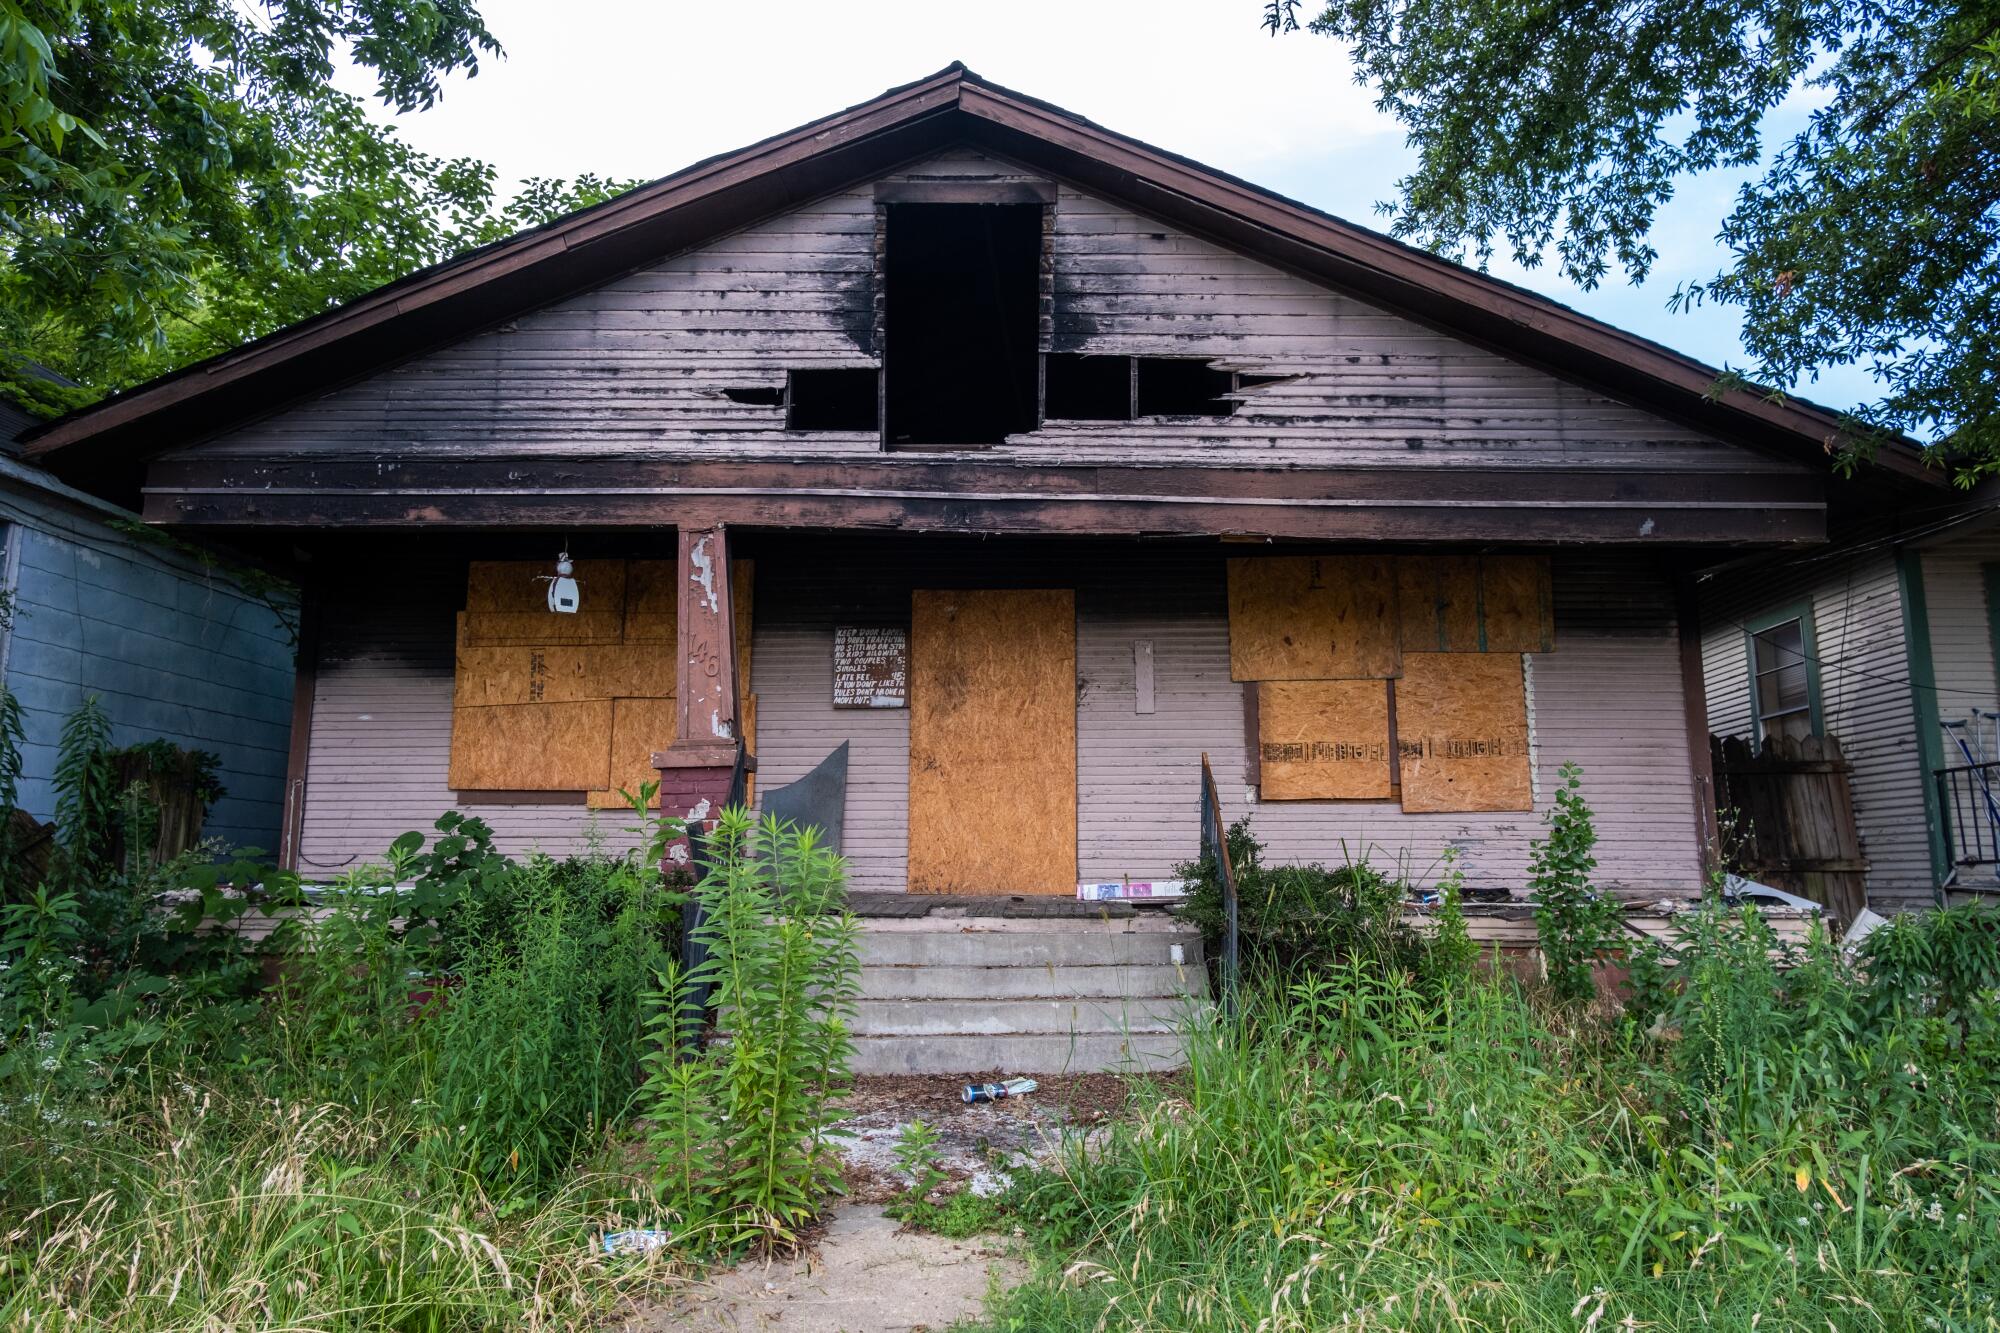 A house on an overgrown lot has a hole in the roof and boarded-up windows and door.